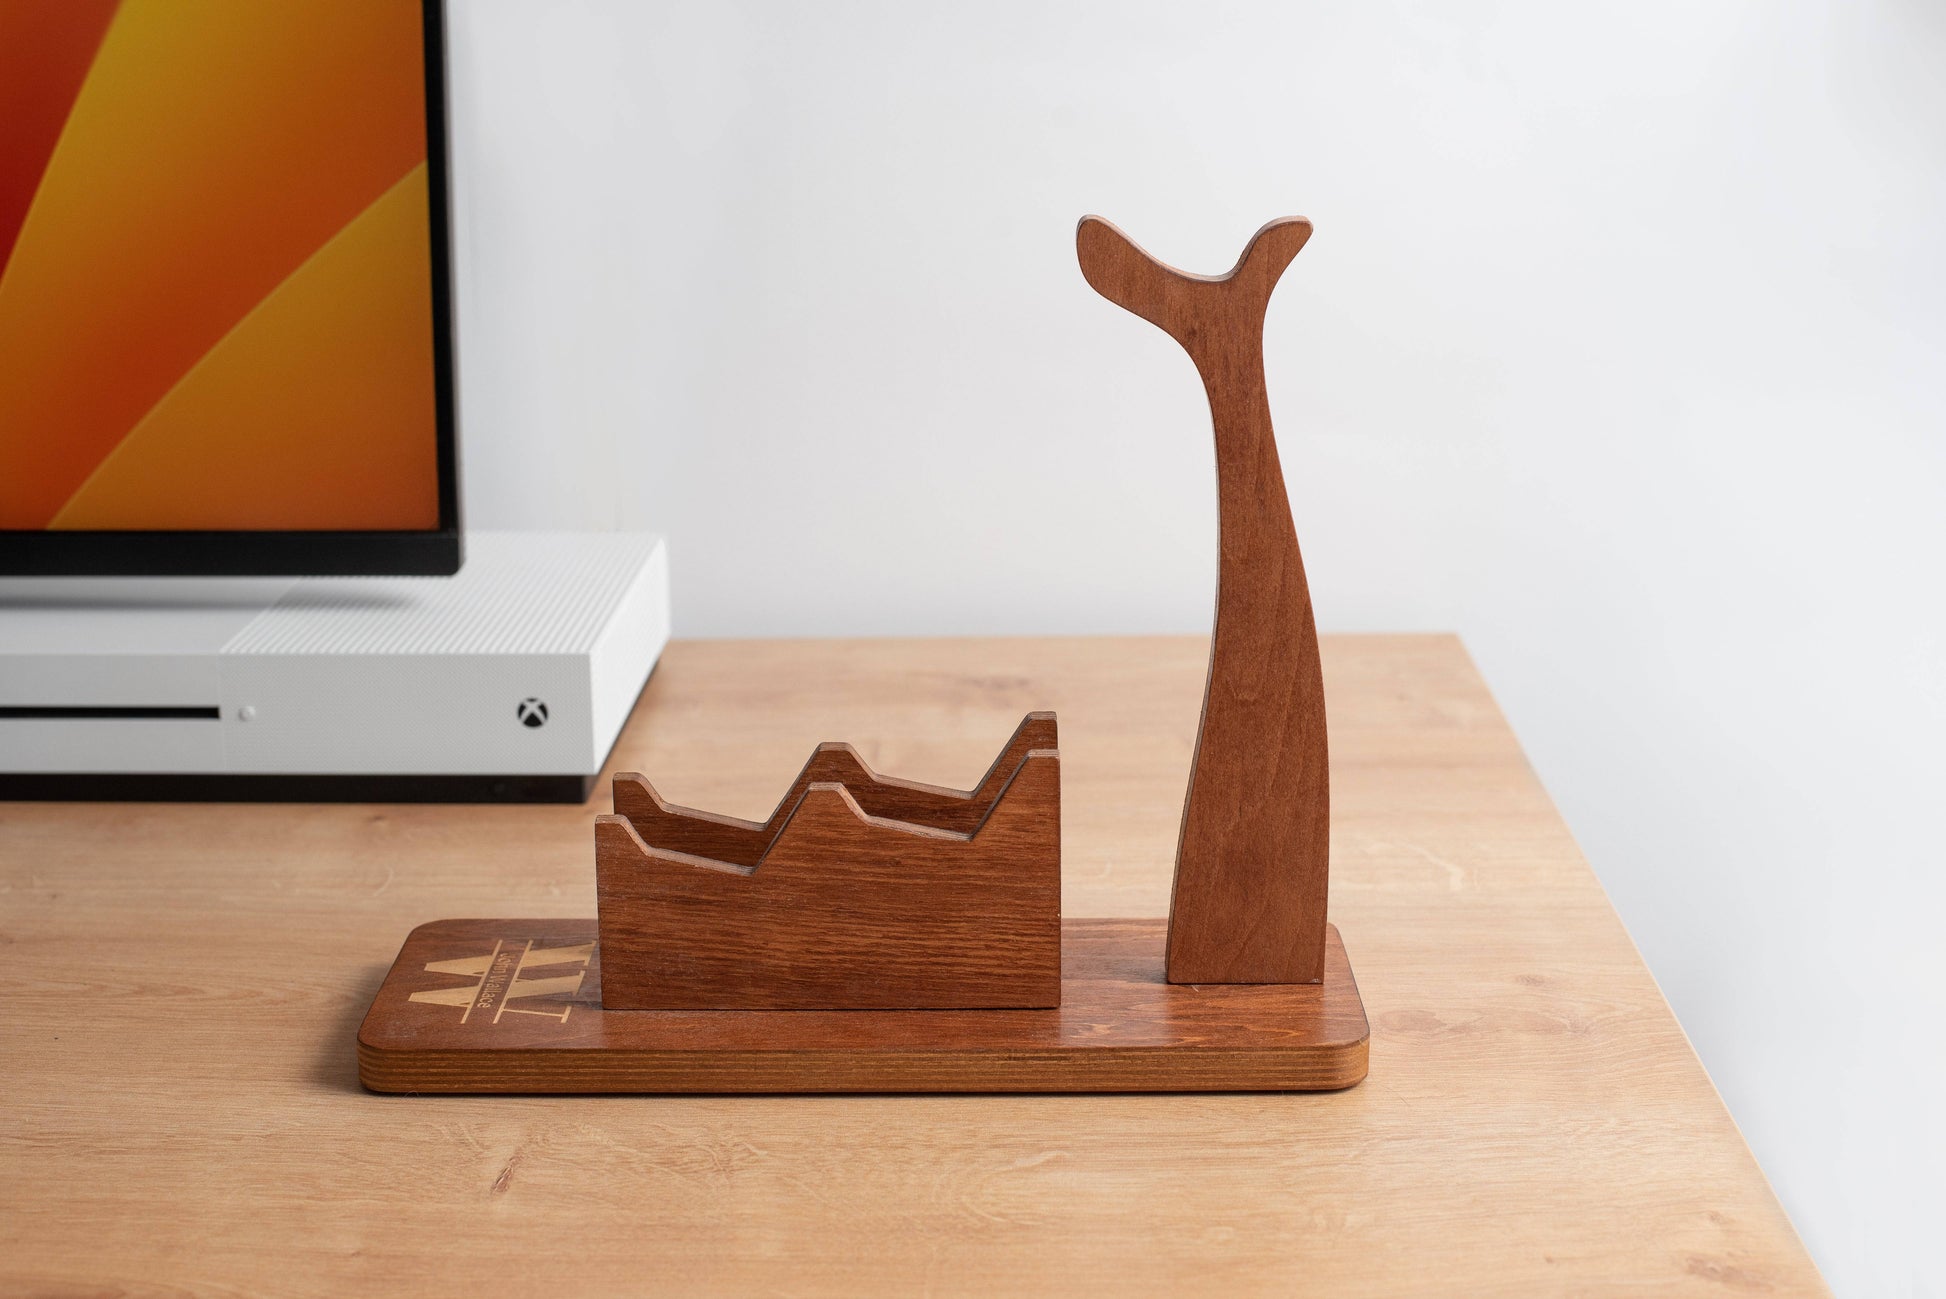 Controller and Headset Stand for Him - Walnut - Madeset